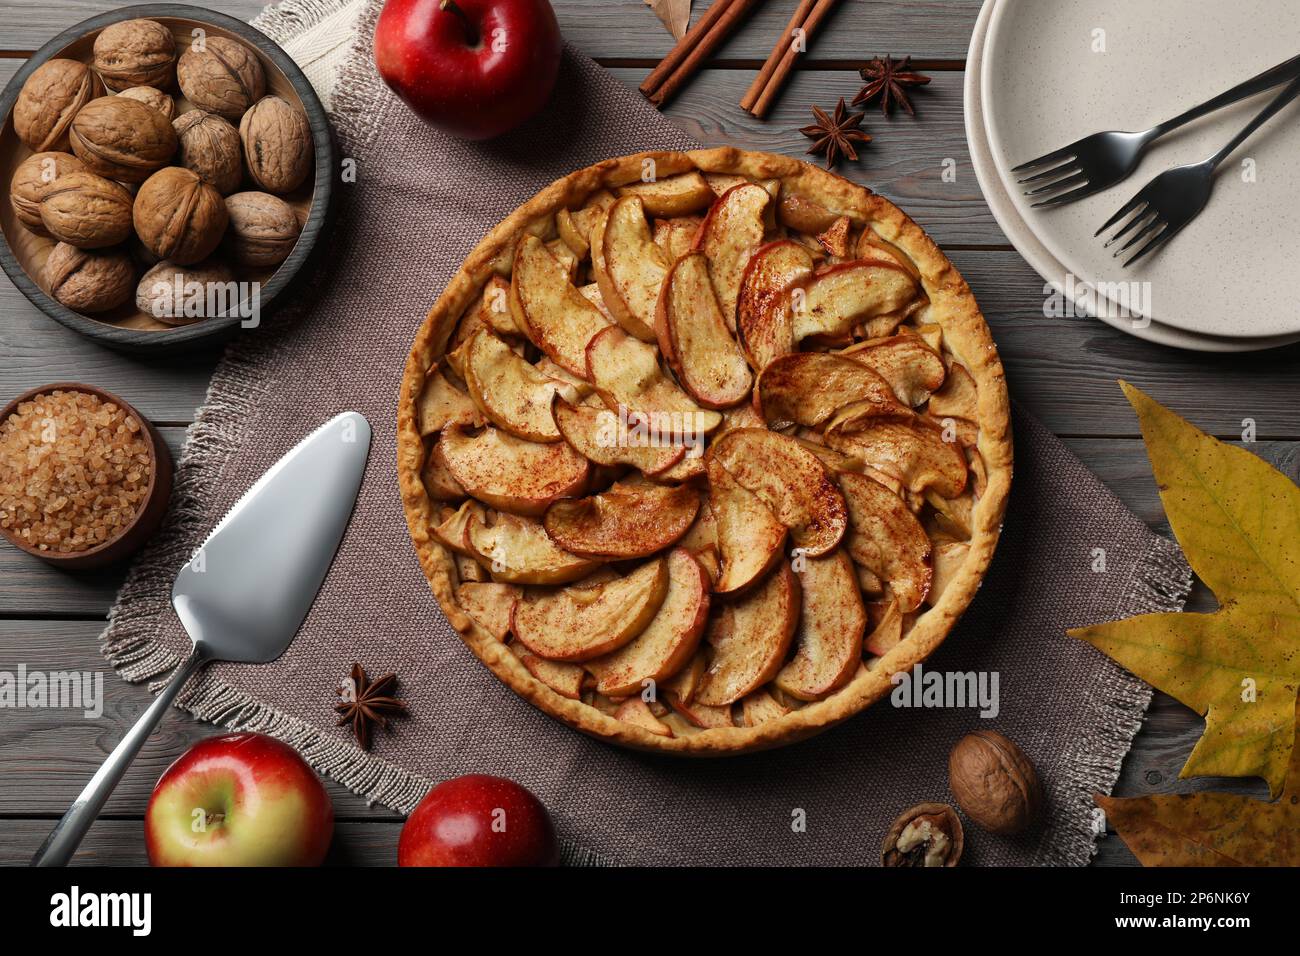 Delicious apple pie and ingredients on grey wooden table, flat lay Stock Photo